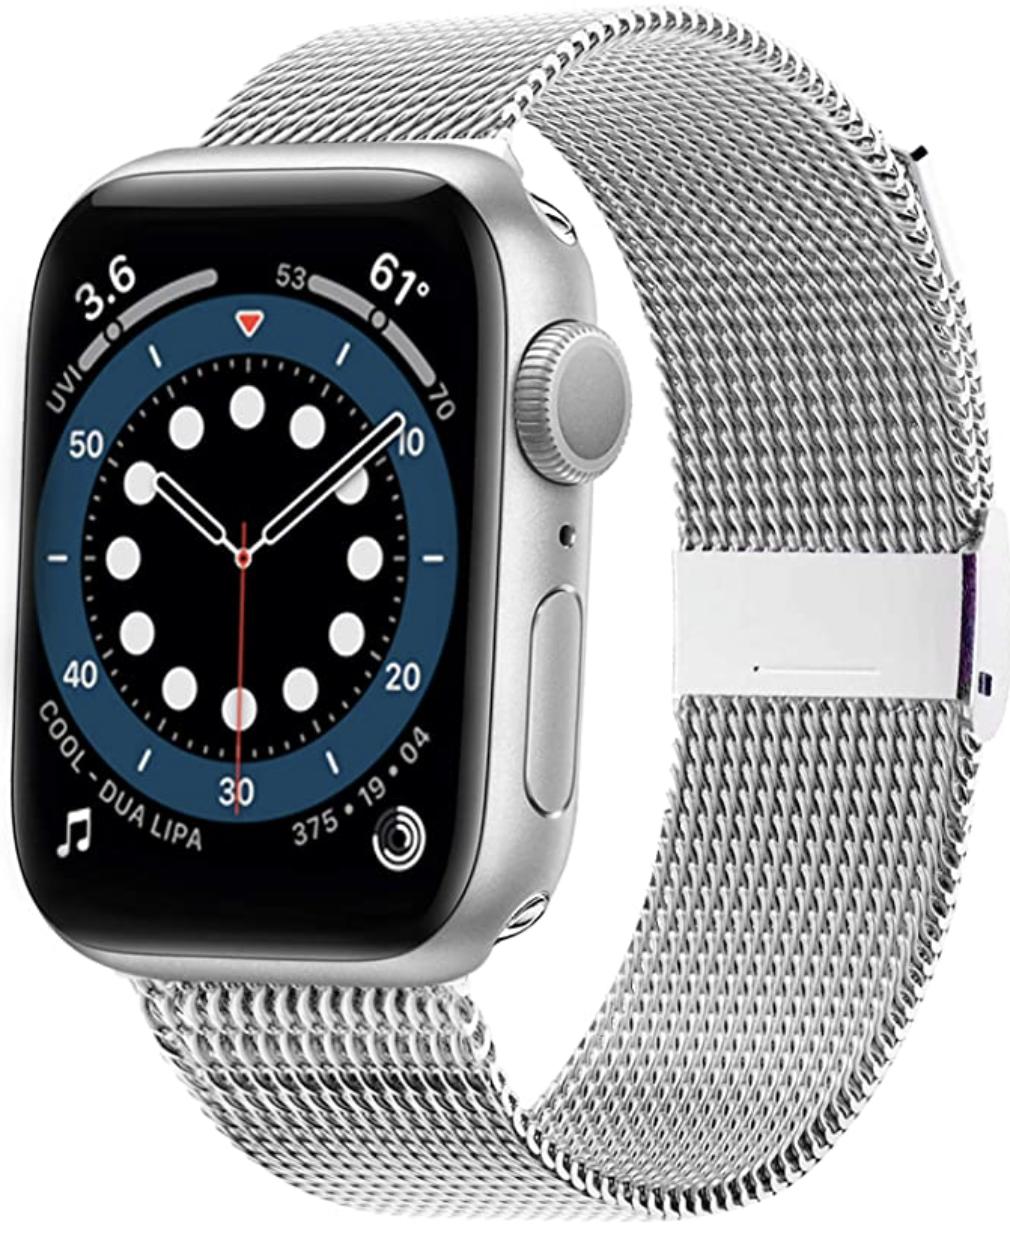 Swhatty Apple Watch Band Milanese Render Cropped